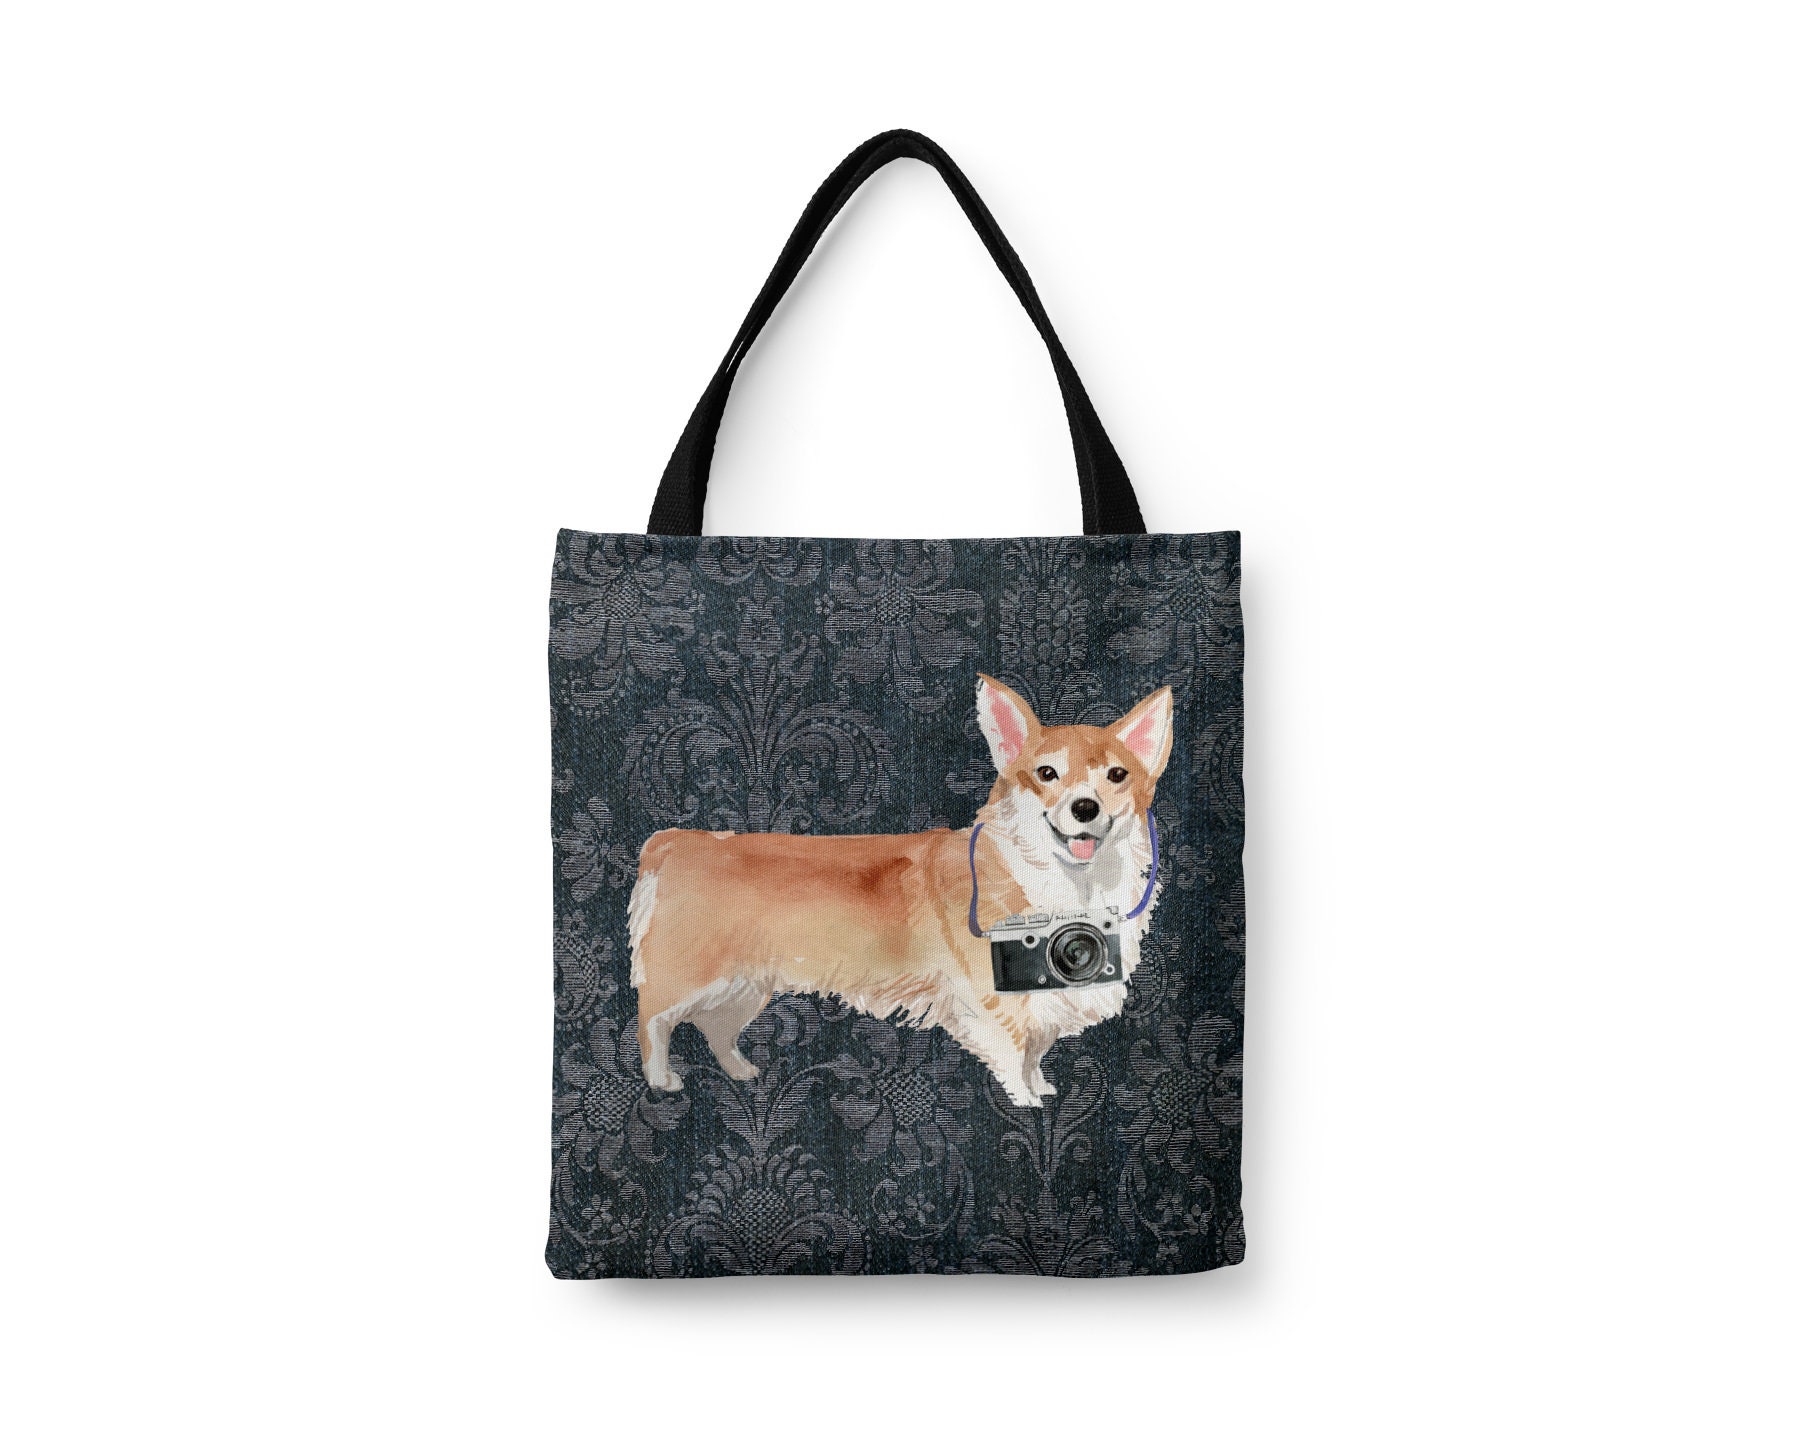 Corgi Dog Tote Bag Illustrated Dogs & 6 Denim Inspired Styles. All Purpose Ideal For Shopping, Laptop, Grocery, Market. Pembroke Pwc